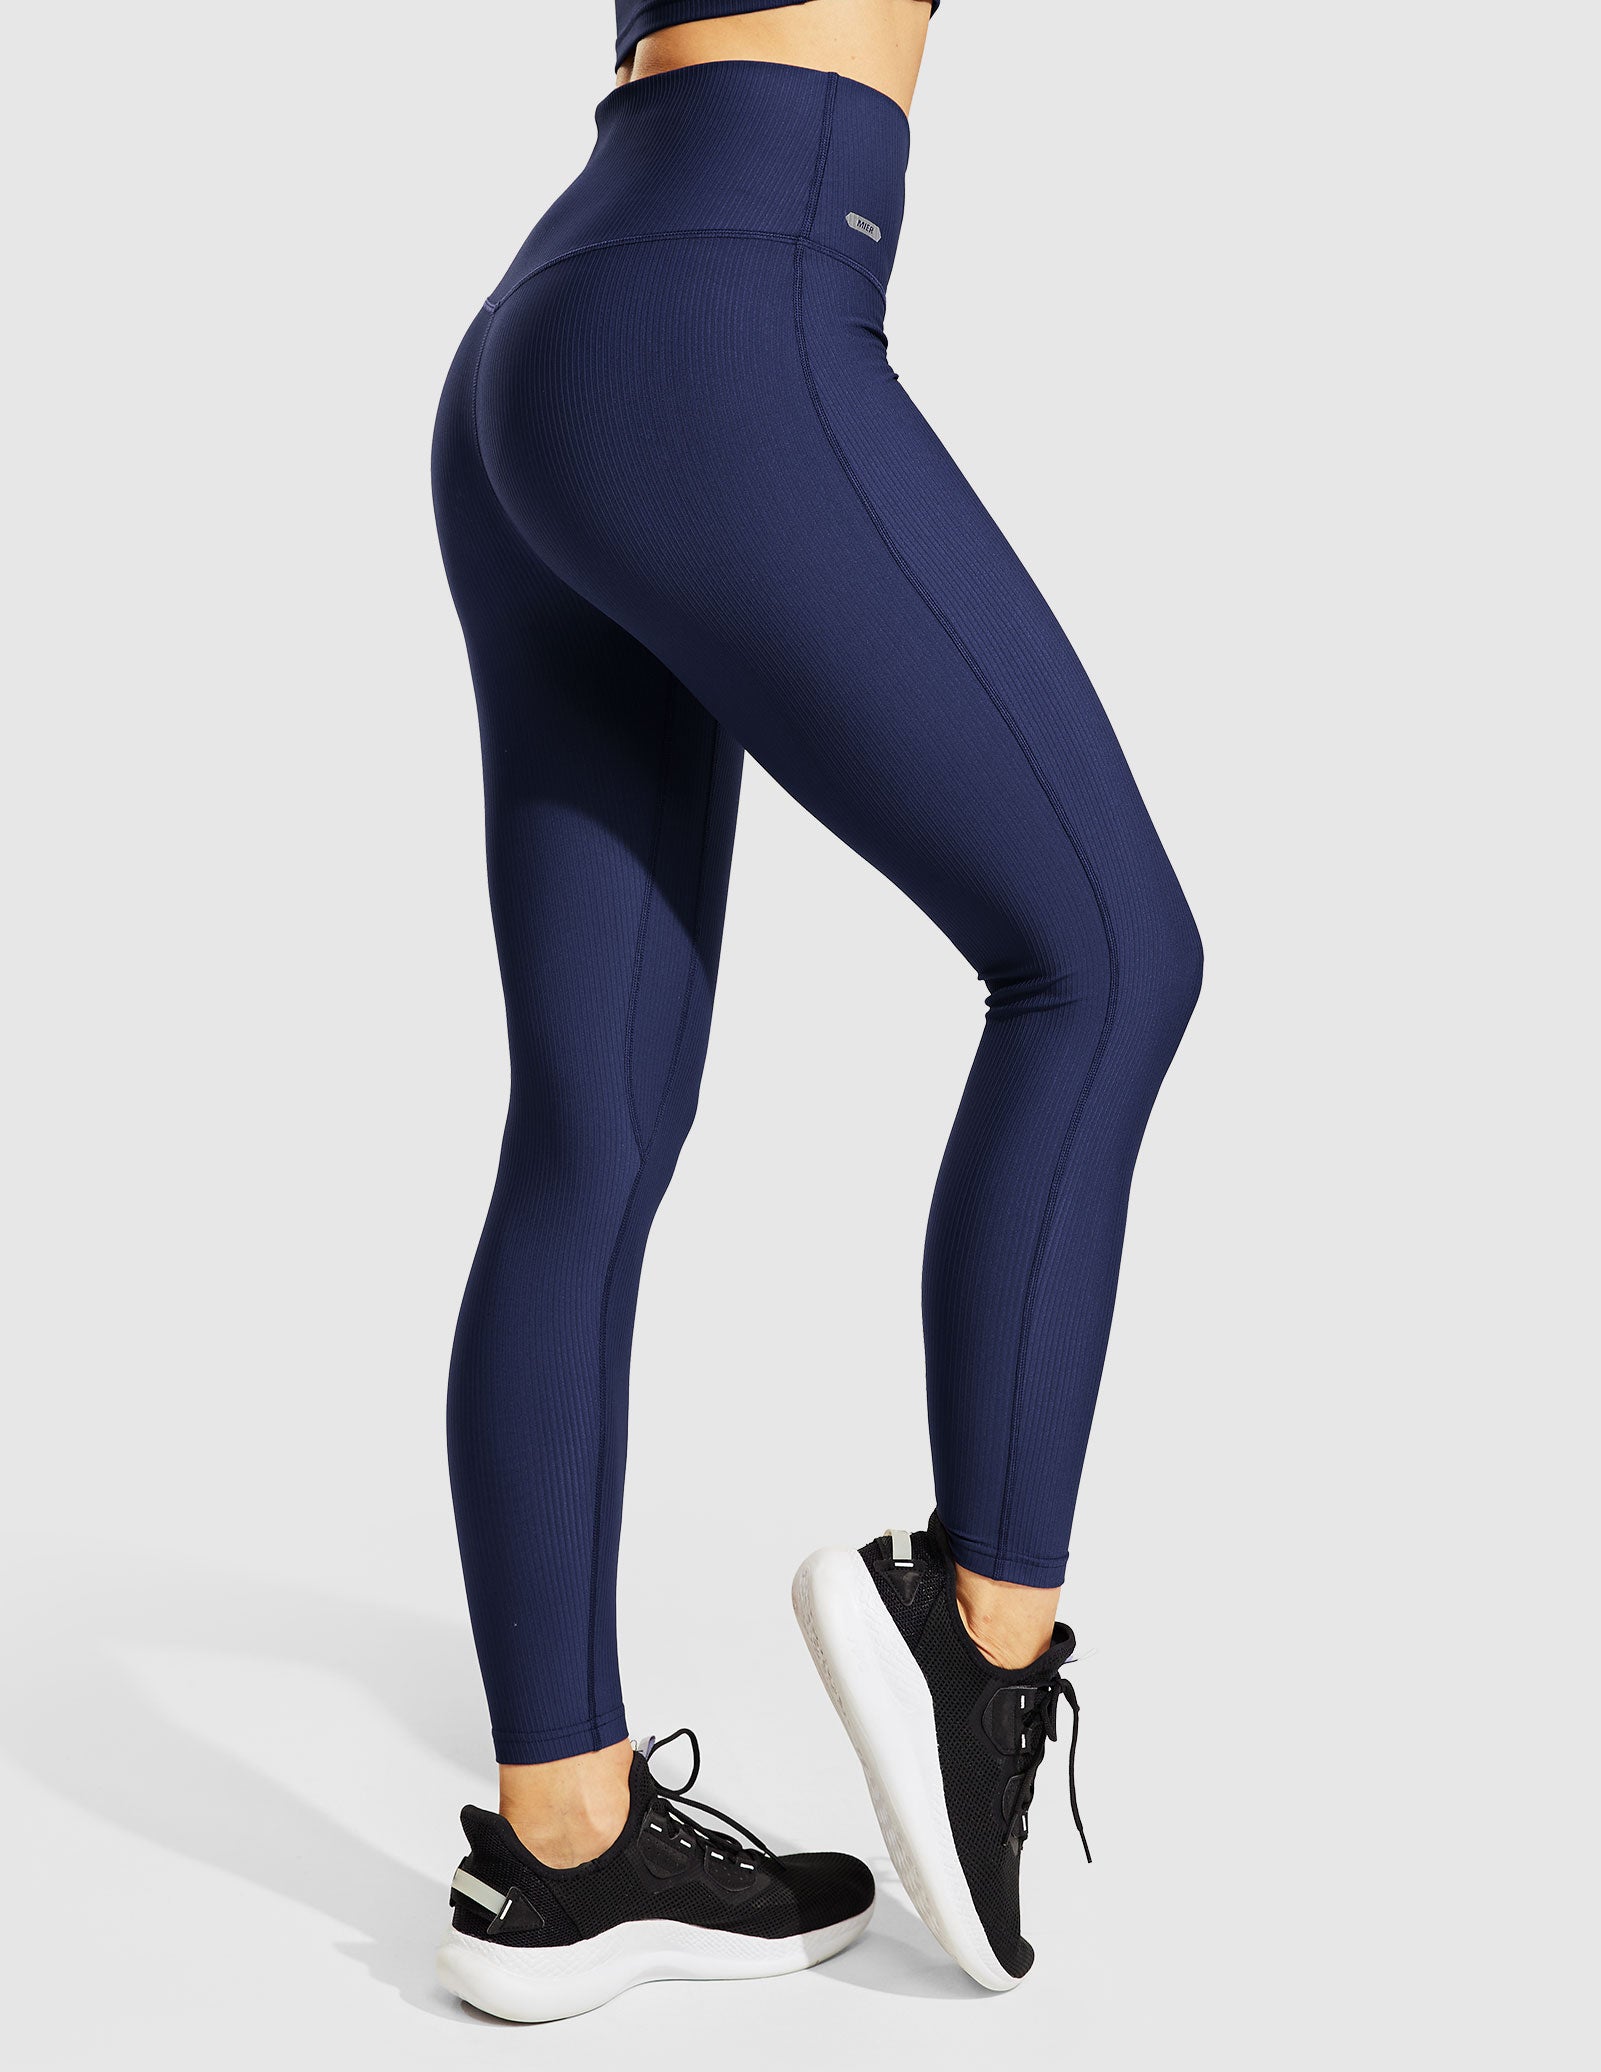 Women's High Waisted Workout Leggings with Inside Pockets